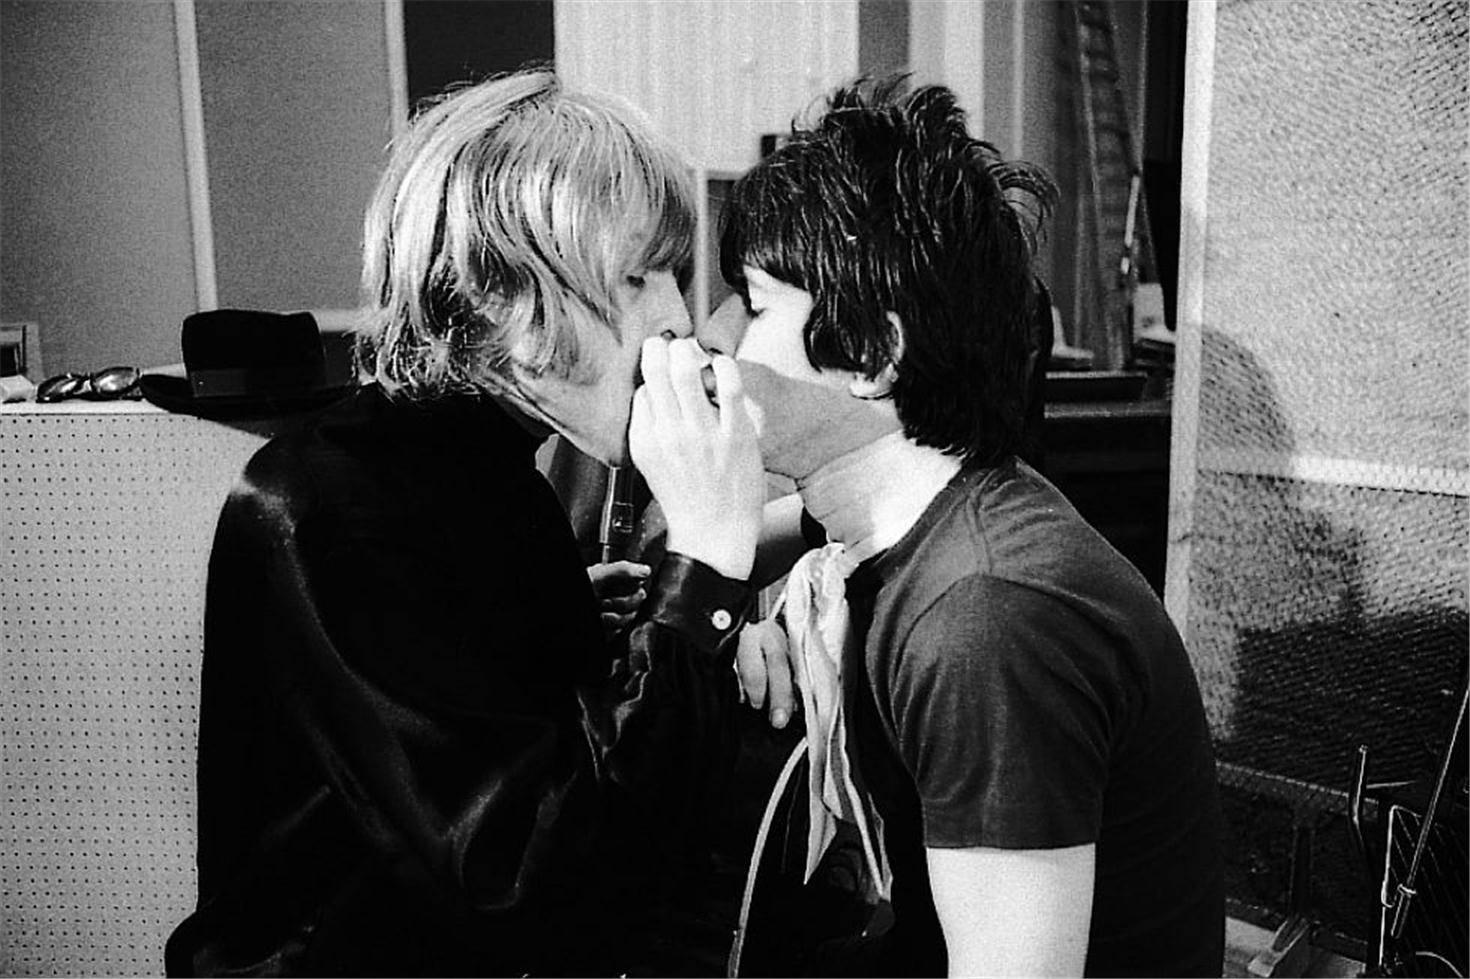 Michael Cooper (b.1941) Black and White Photograph - Keith Richards & Brian Jones, "Joint"